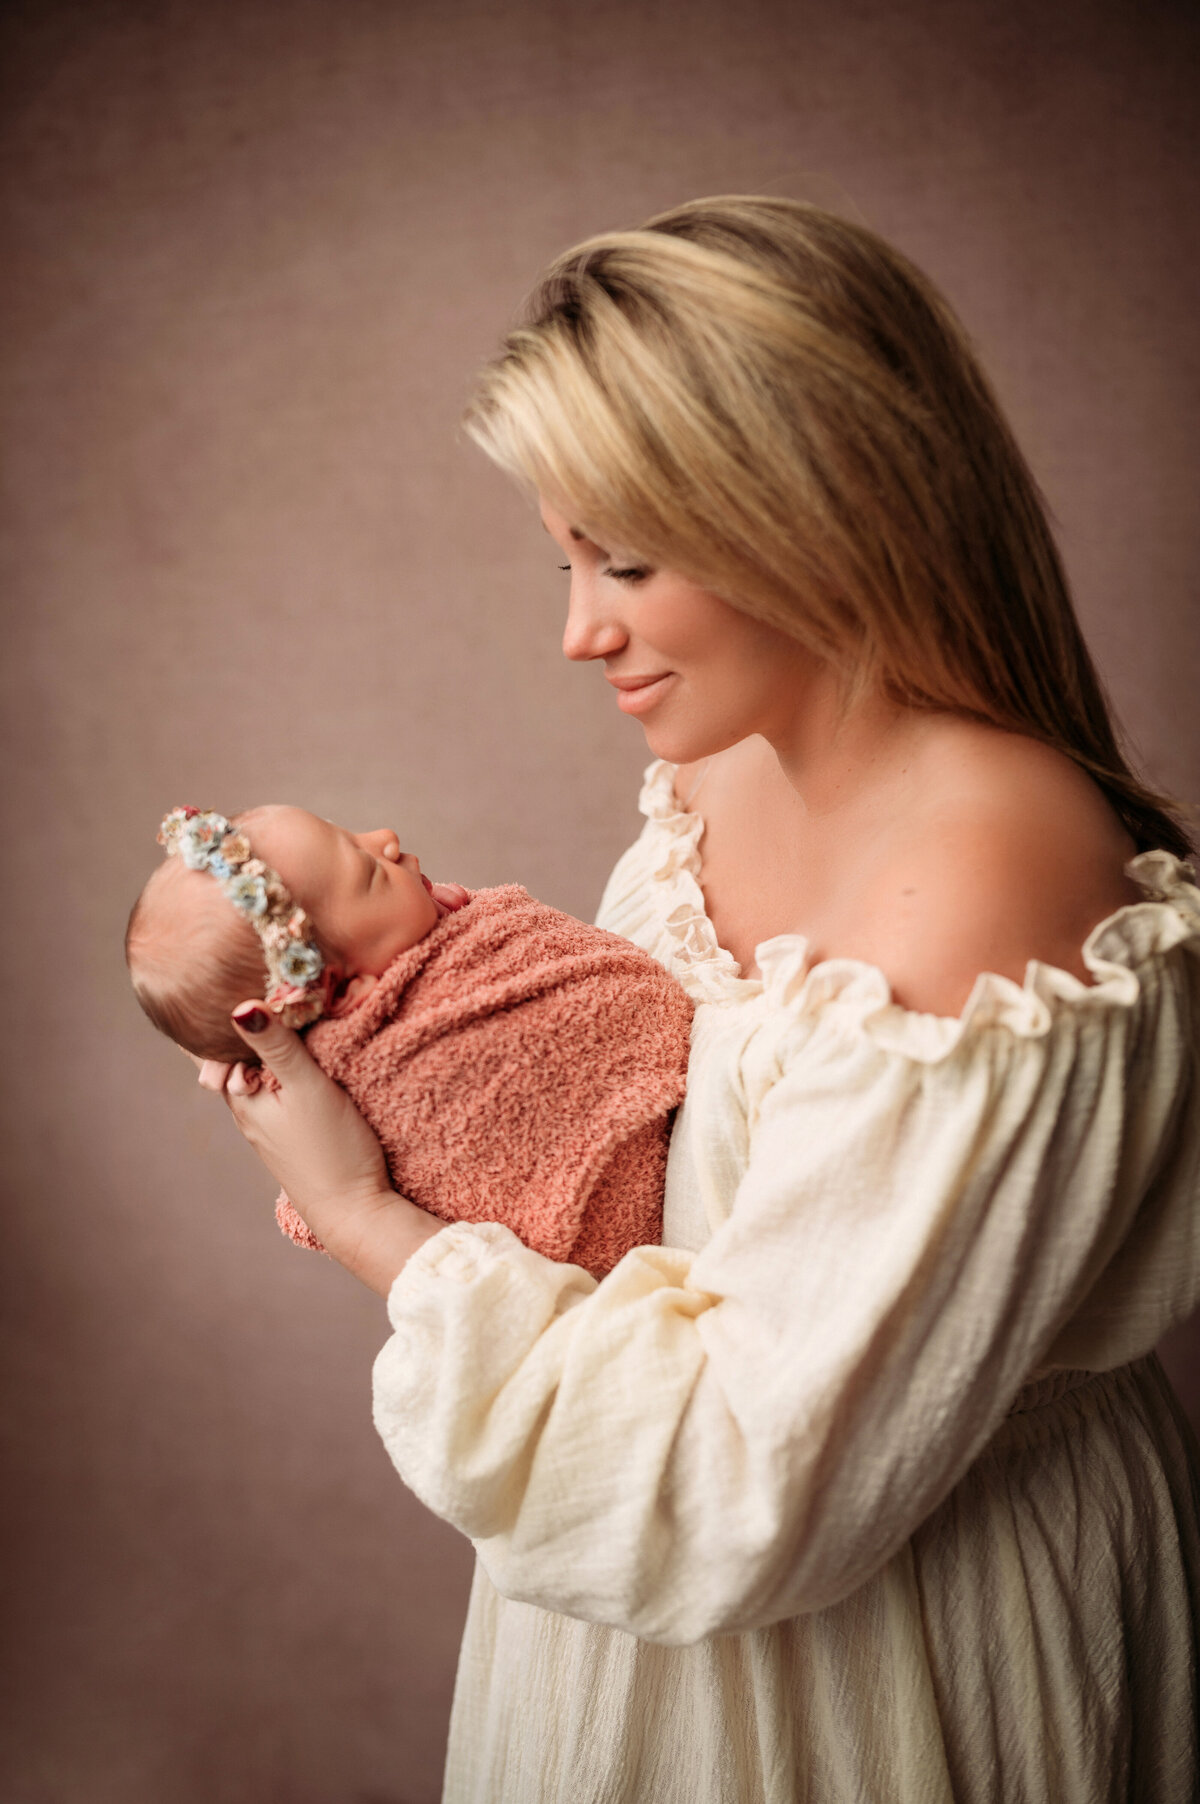 new mom with short blonde hair wearing a cream peasant gown holding swaddled newborn baby girl in a pink swaddle and floral headband looking at mom on brown backdrop